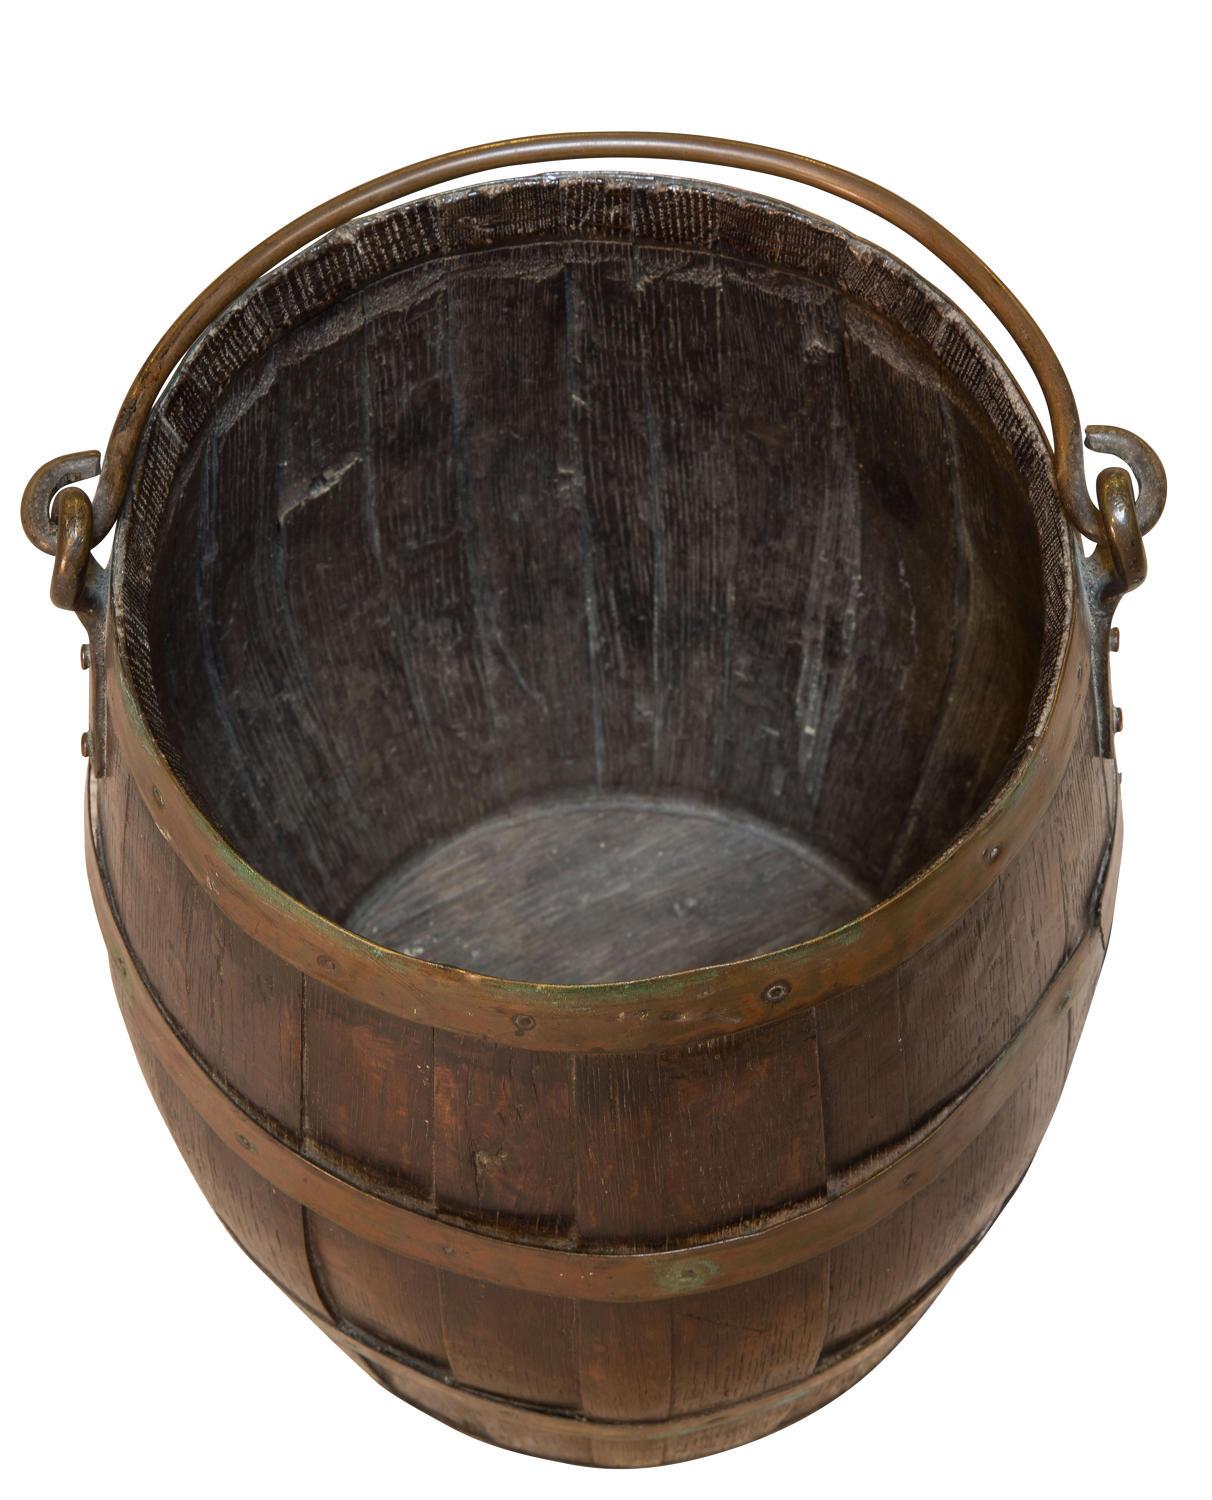 Coopered oak and brass bucket with swing handle,

circa 1900.